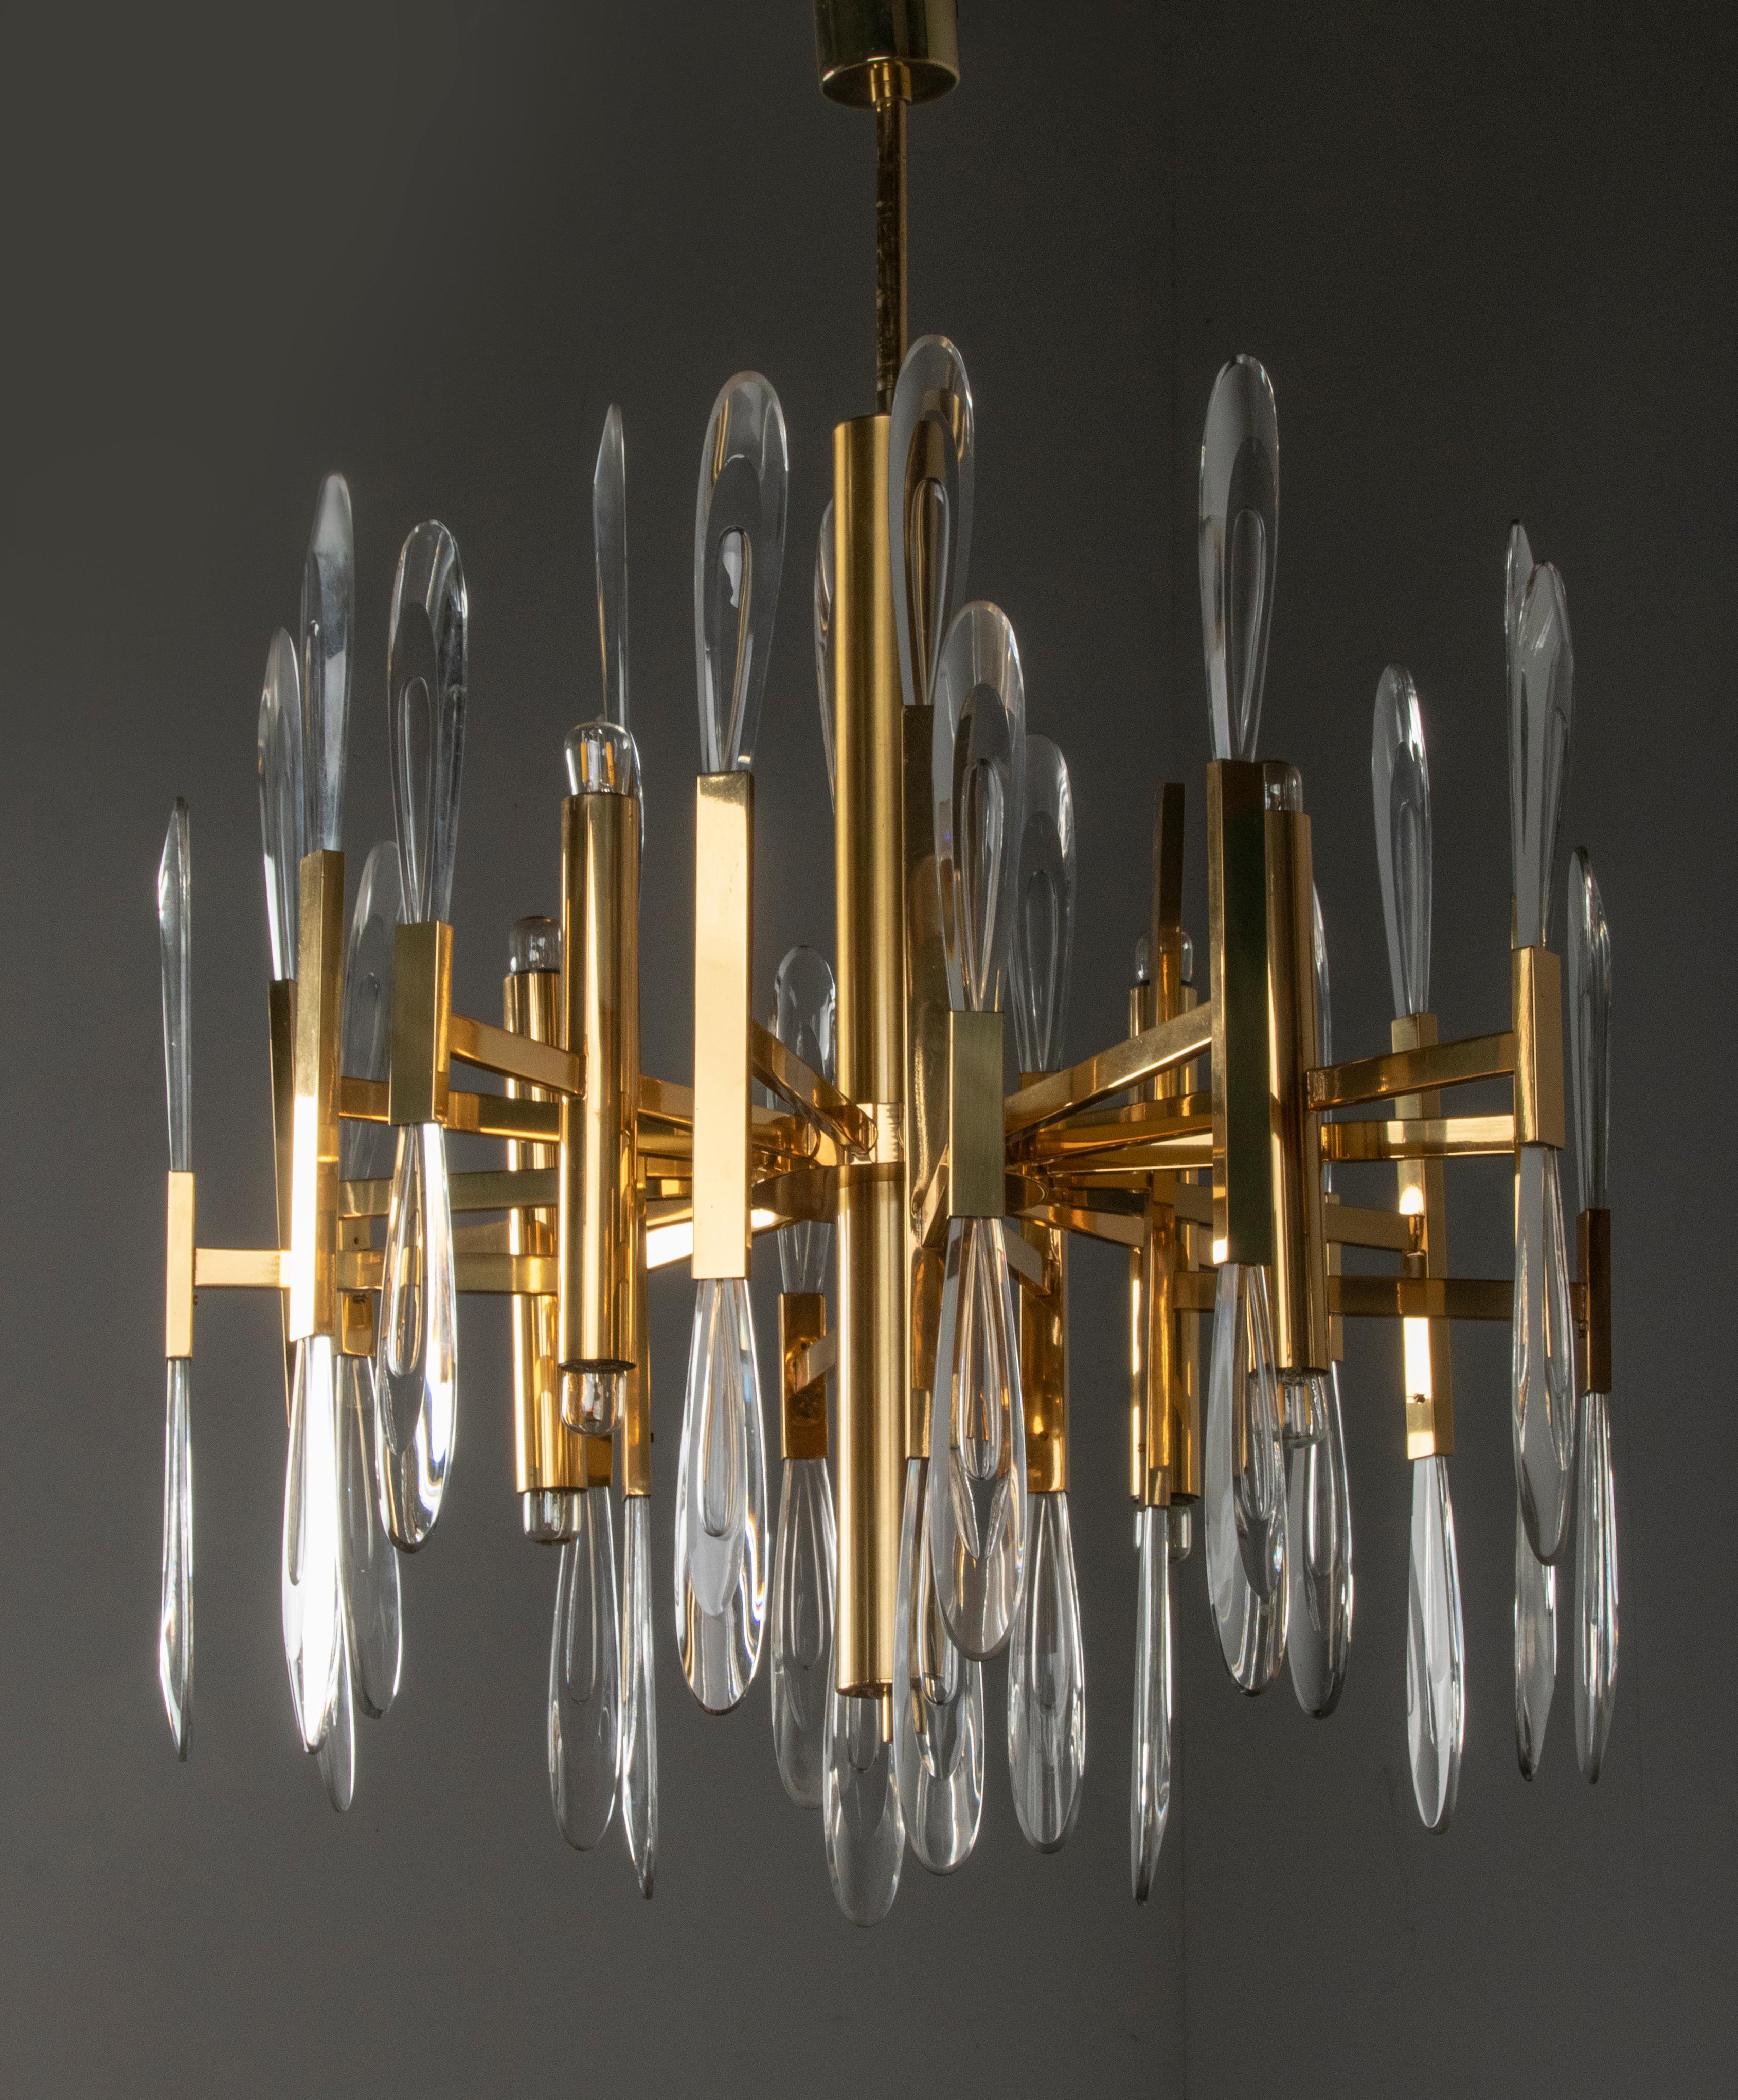 Italian mid-century chandelier by Gaetano Sciolari. It has eight lights, four lights pointing up, and four down. It is made from highly polished brass with crystal cut drops in the holders. It gives a beautiful atmospheric effect, the combination of